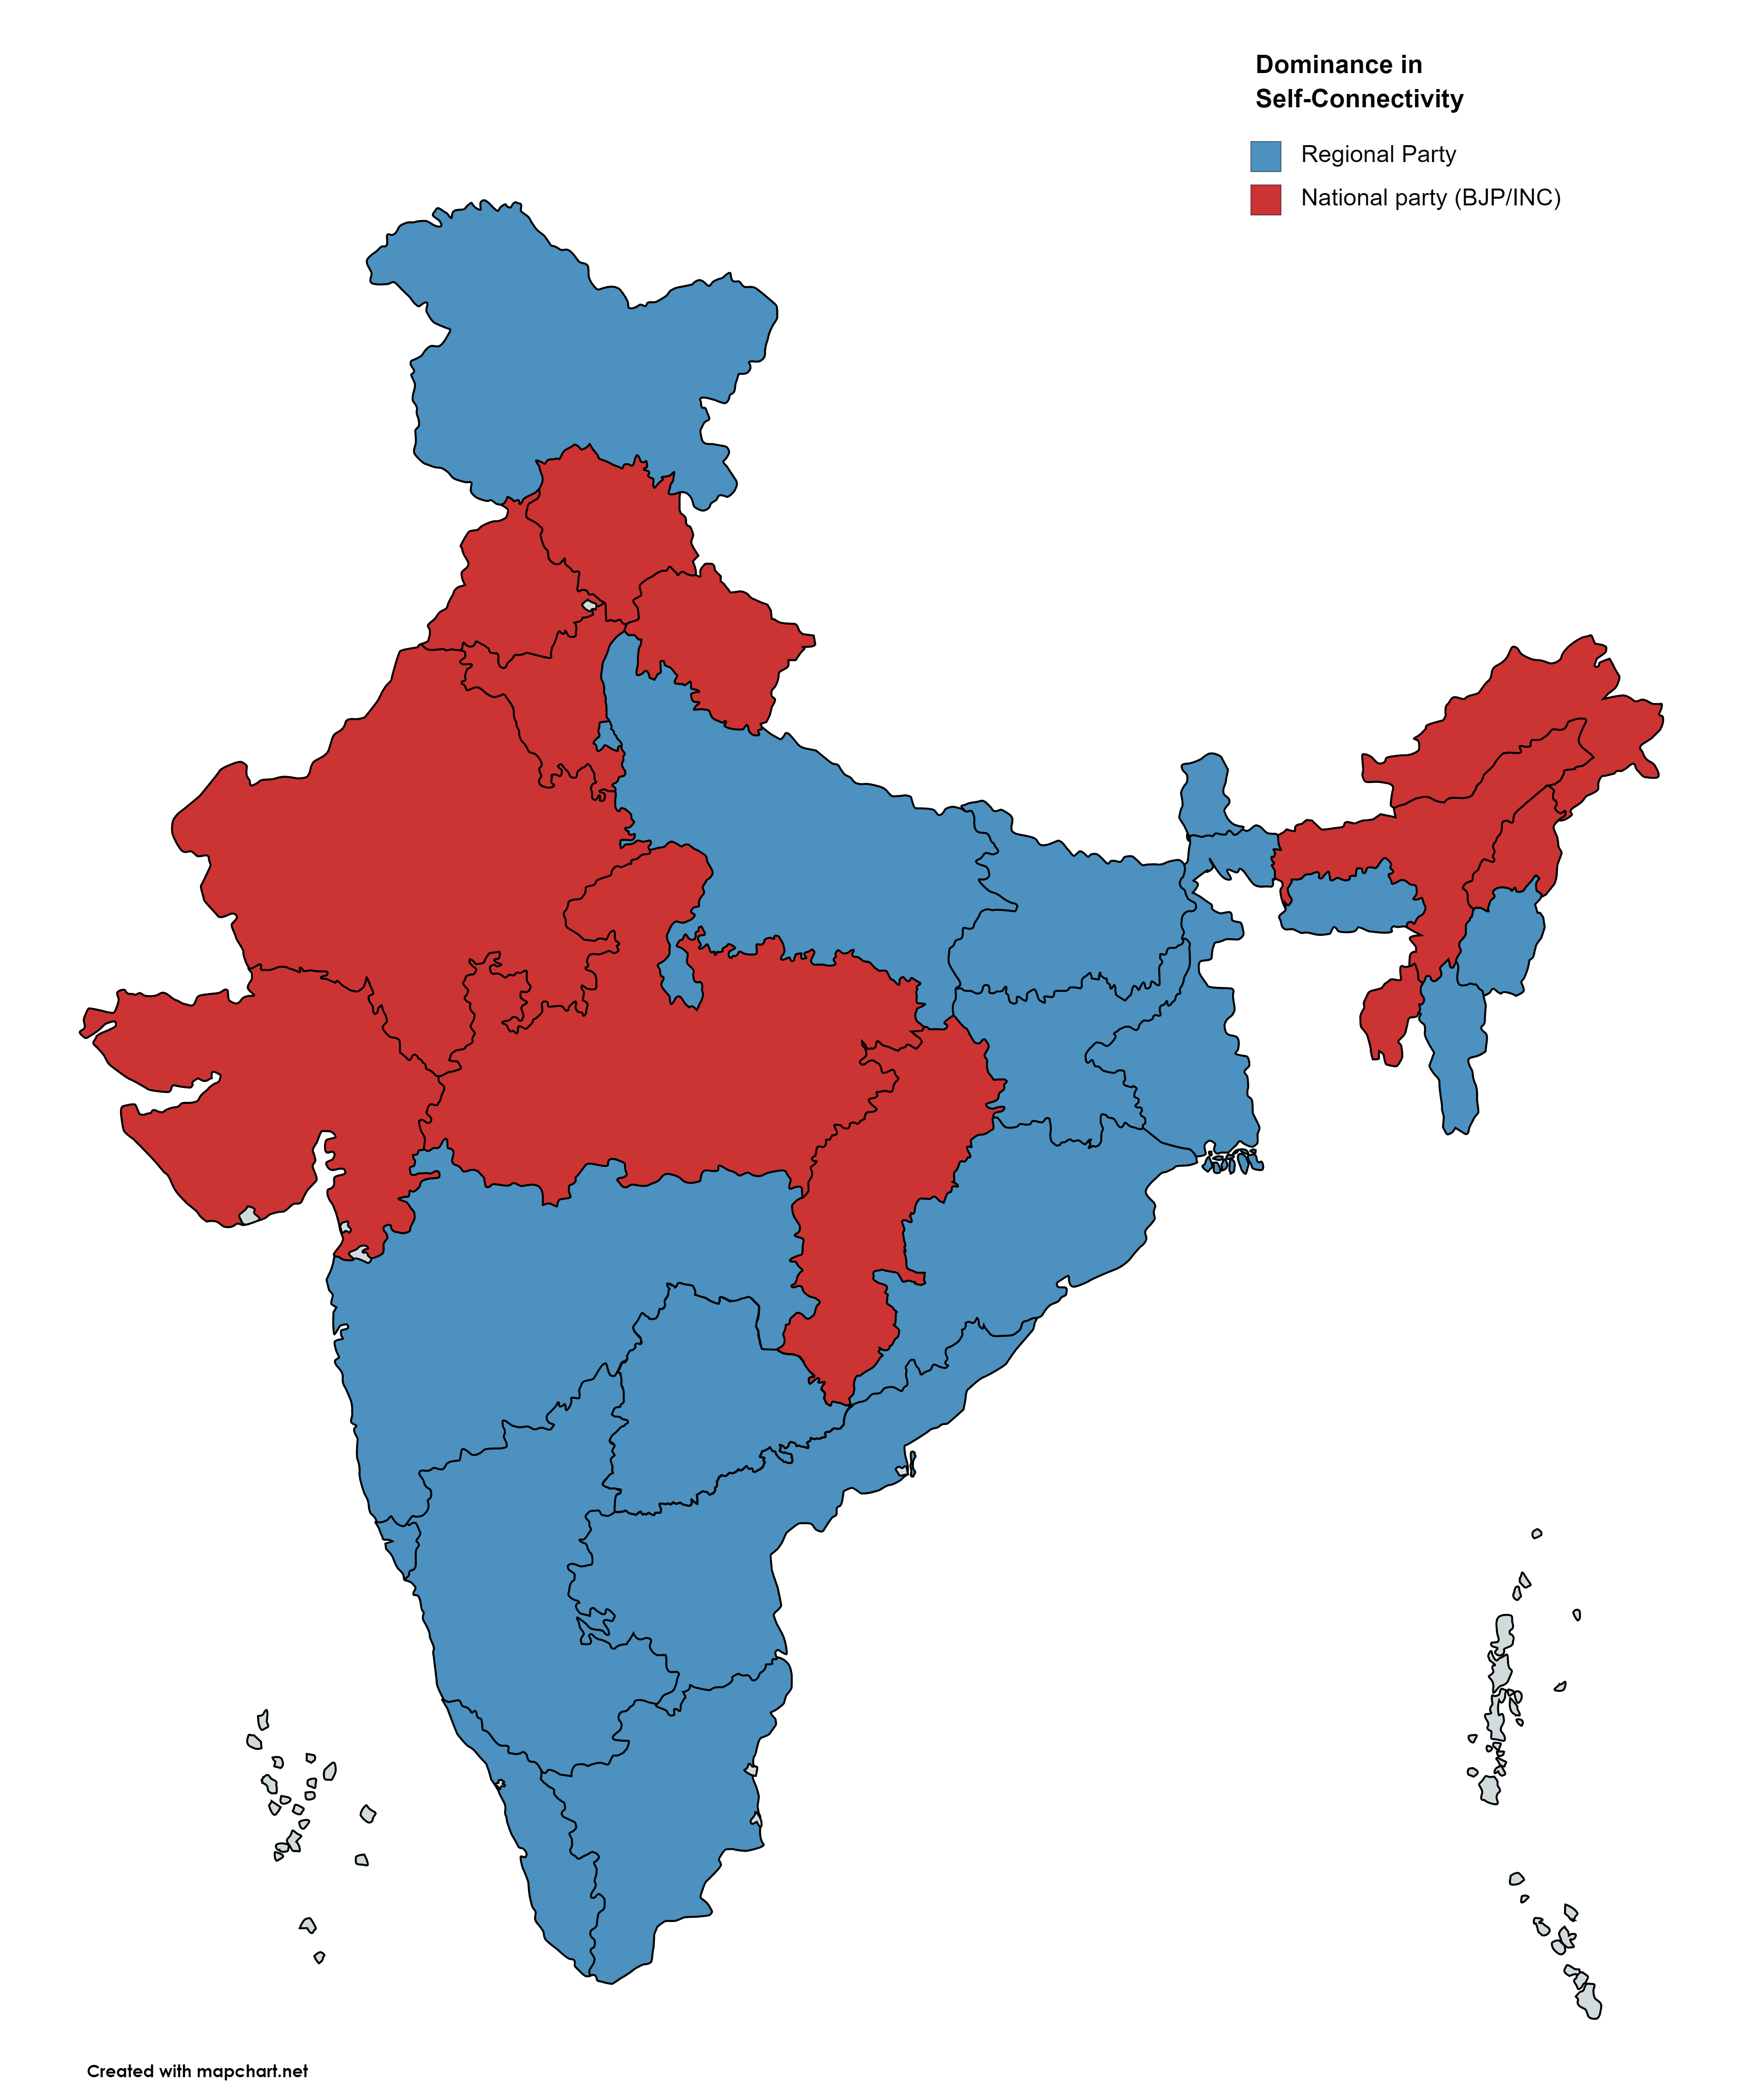 Figure 14: Indian Map highlighting the states where state parties are well connected within the state (shown in blue) than the top national parties (BJP and INC) which is shown in red.